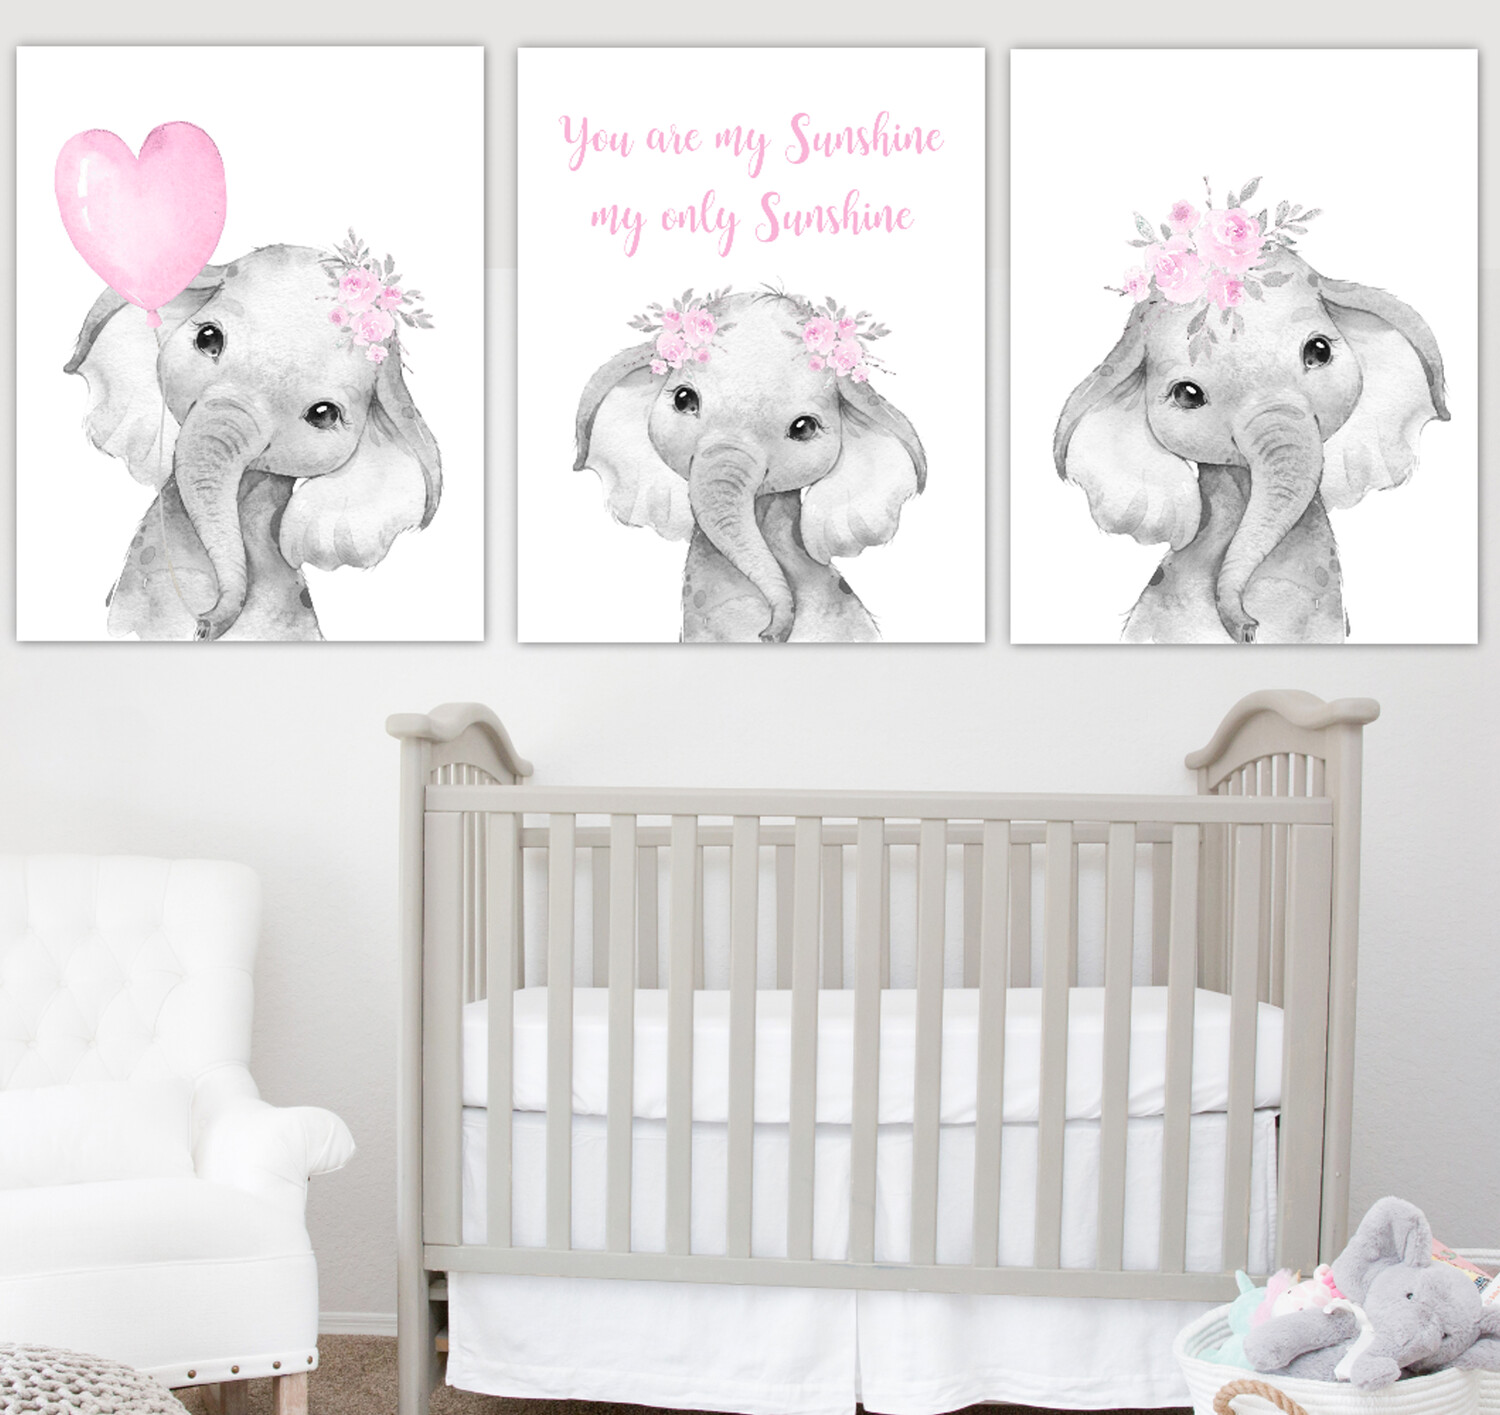 Pink Baby Girl Nursery Art Elephant With Balloons Watercolor Flowers Safari Animals Wall Decor 3 UNFRAMED PRINTS or CANVAS